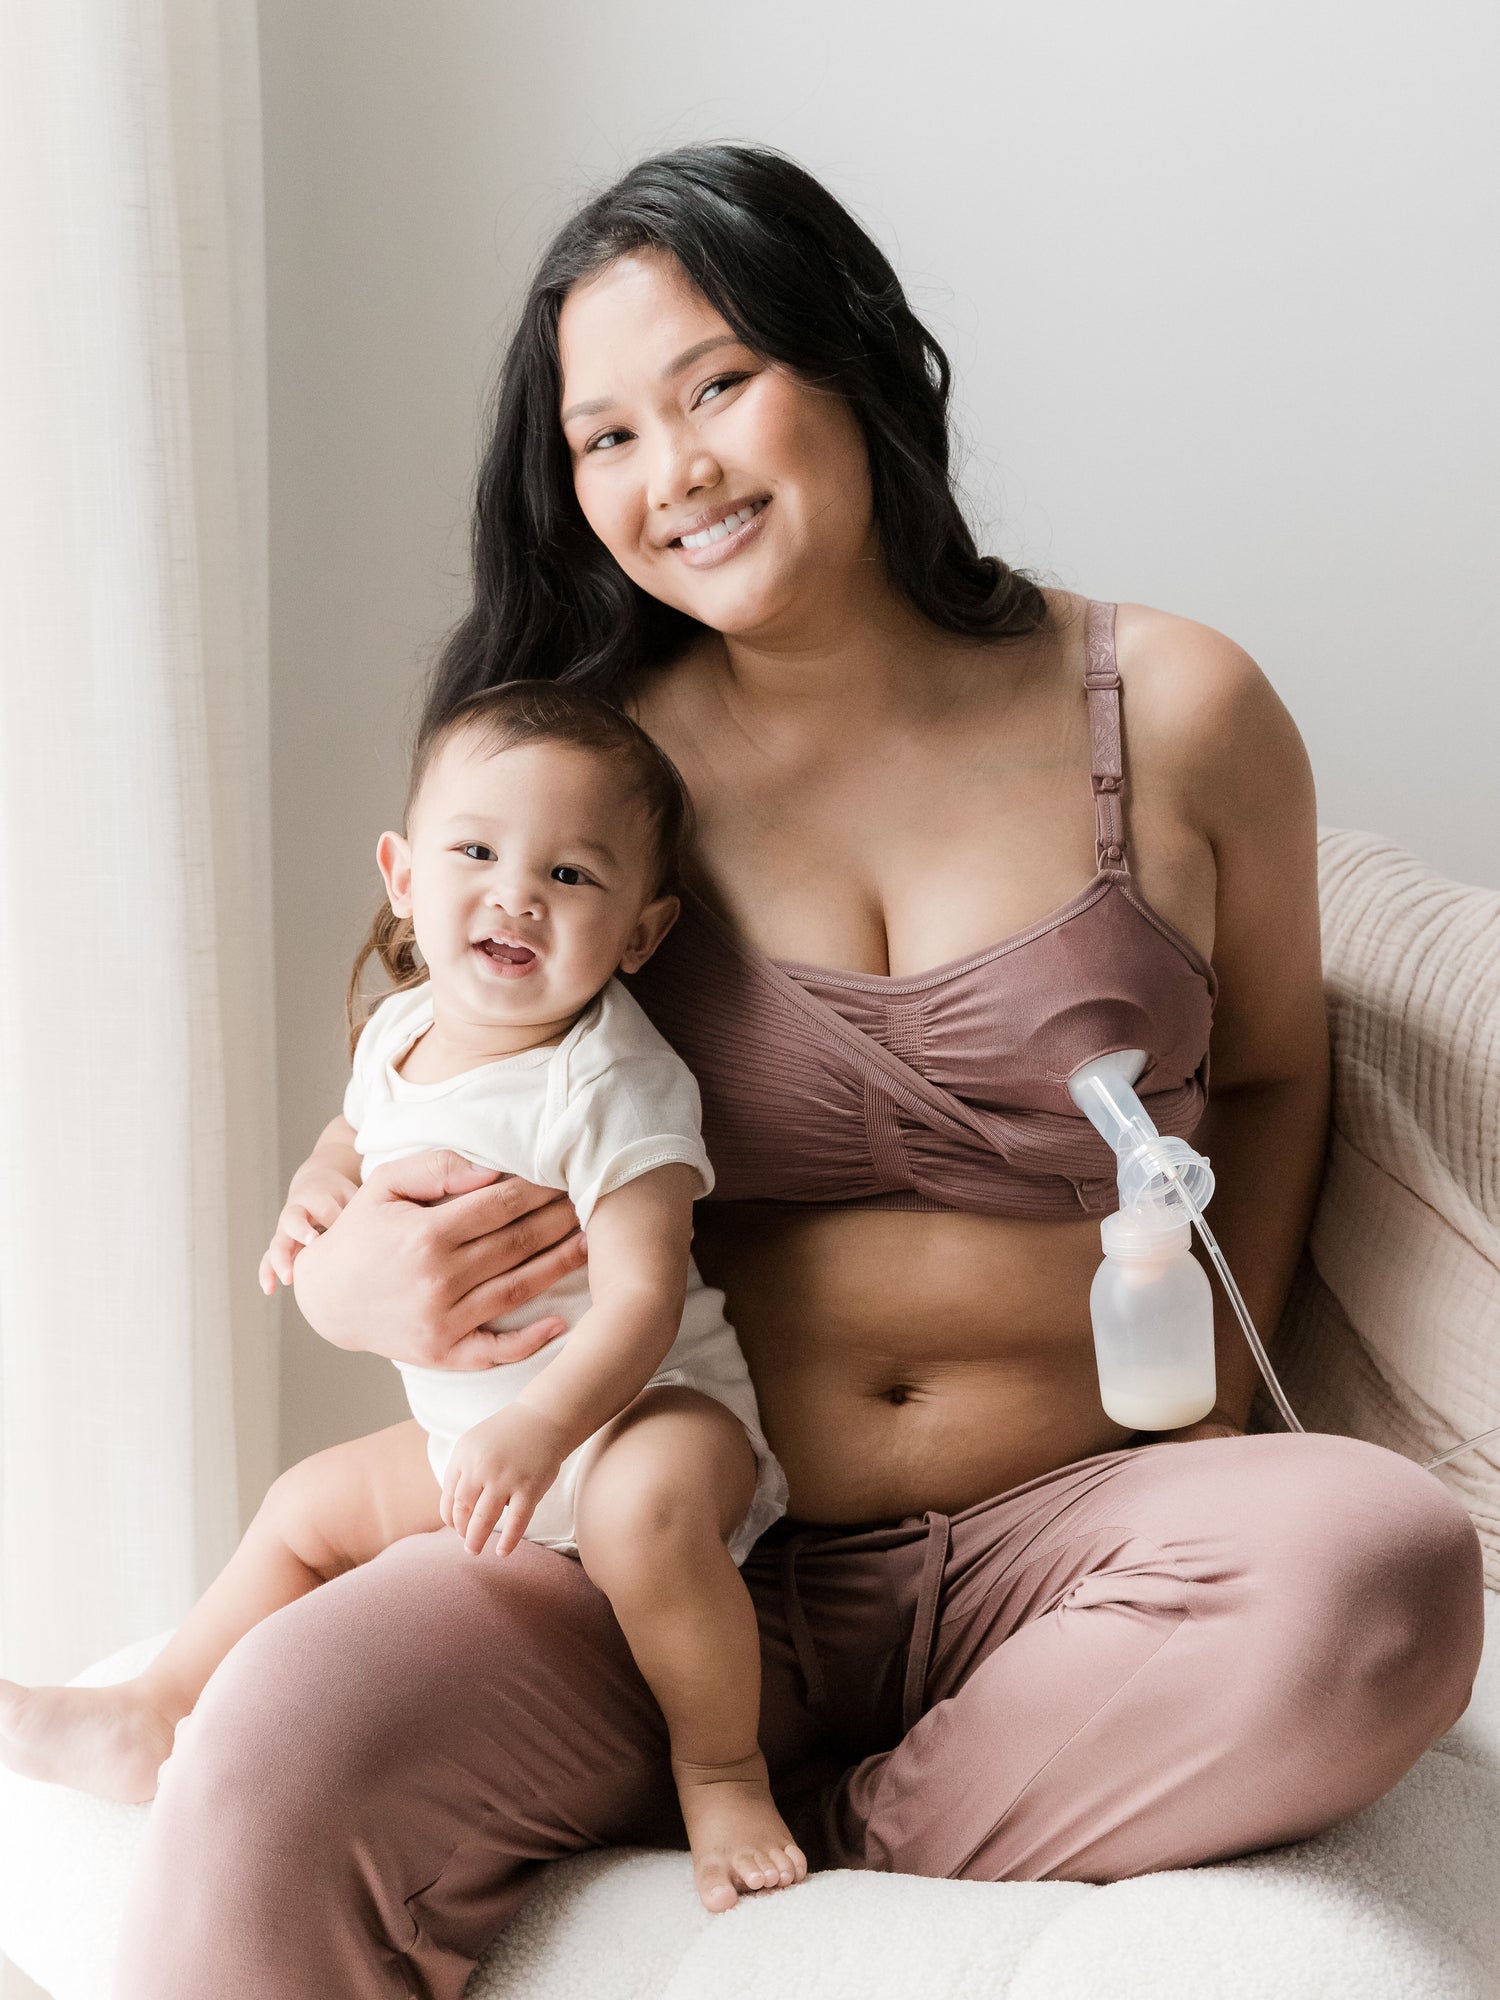 Simple Wishes Aignature Hands Free Pumping Bra, Babies & Kids